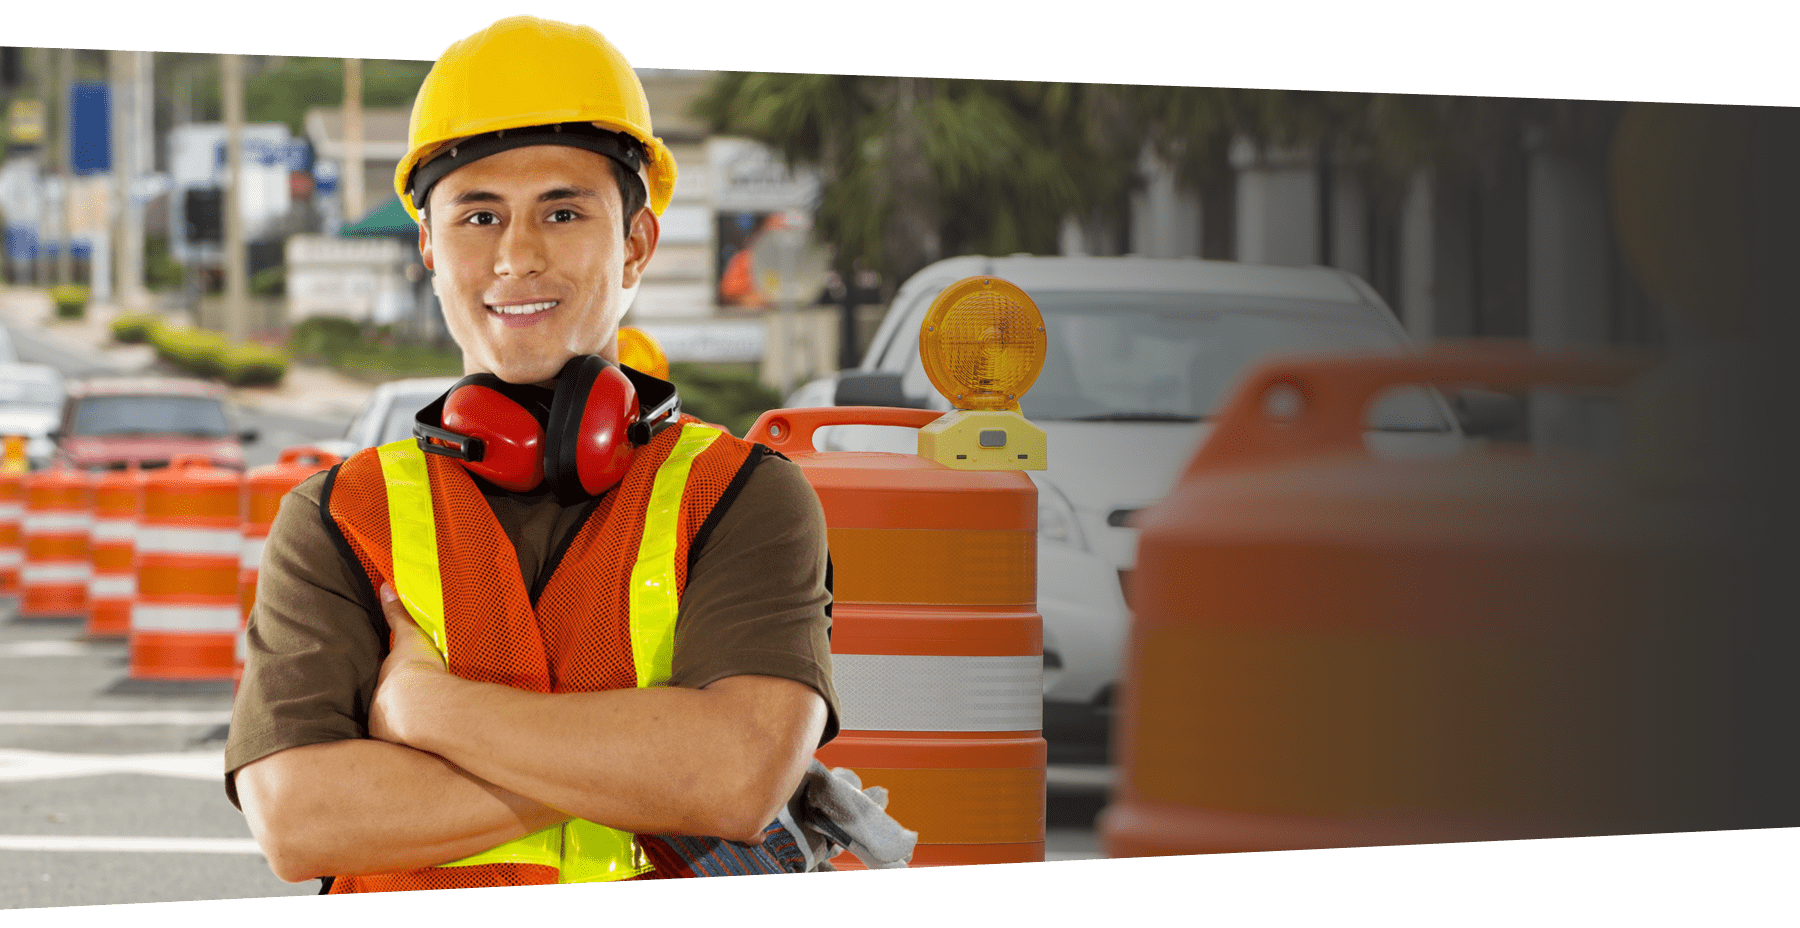 construction worker with hard hat and vest